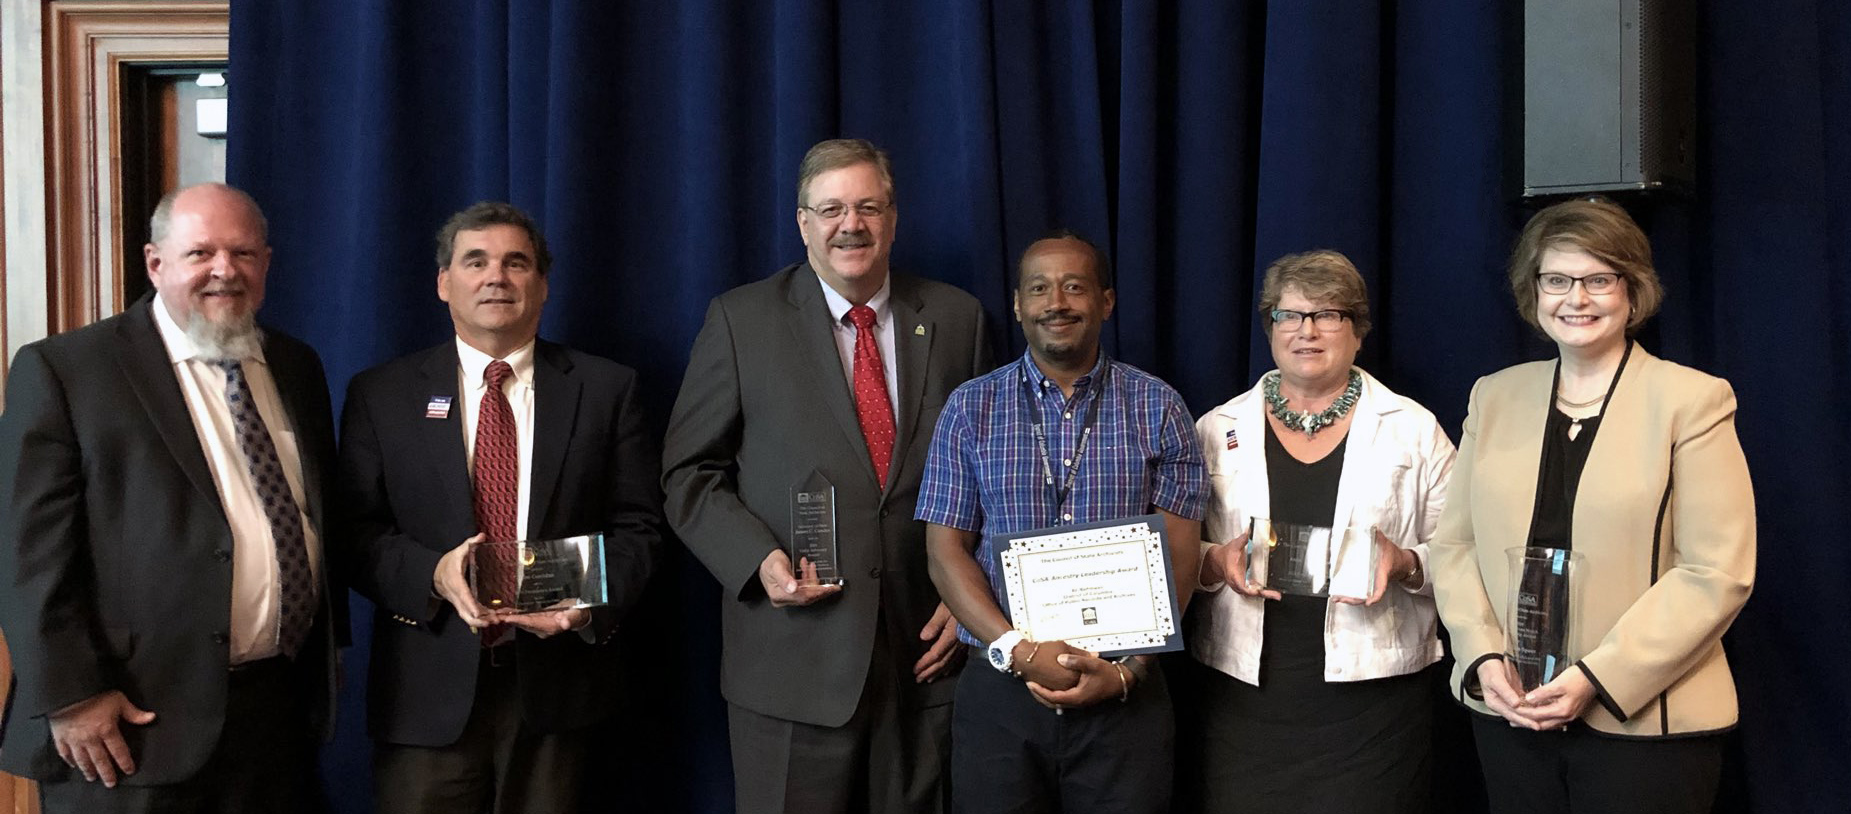 Dr. Lisa Speer (far right) recently received the Council of State Archivists’ Victoria Irons Walch Leadership Award. She is pictured here with other CoSA award winners, including: Tim Baker, CoSA president and Maryland state archivist; Jim Corridan, former Indiana state archivist; Vermont Secretary of State Jim Condos; Ali Rahmaan from the District of Columbia Office of Public Records; and Anne Ackerson, former CoSA executive director.